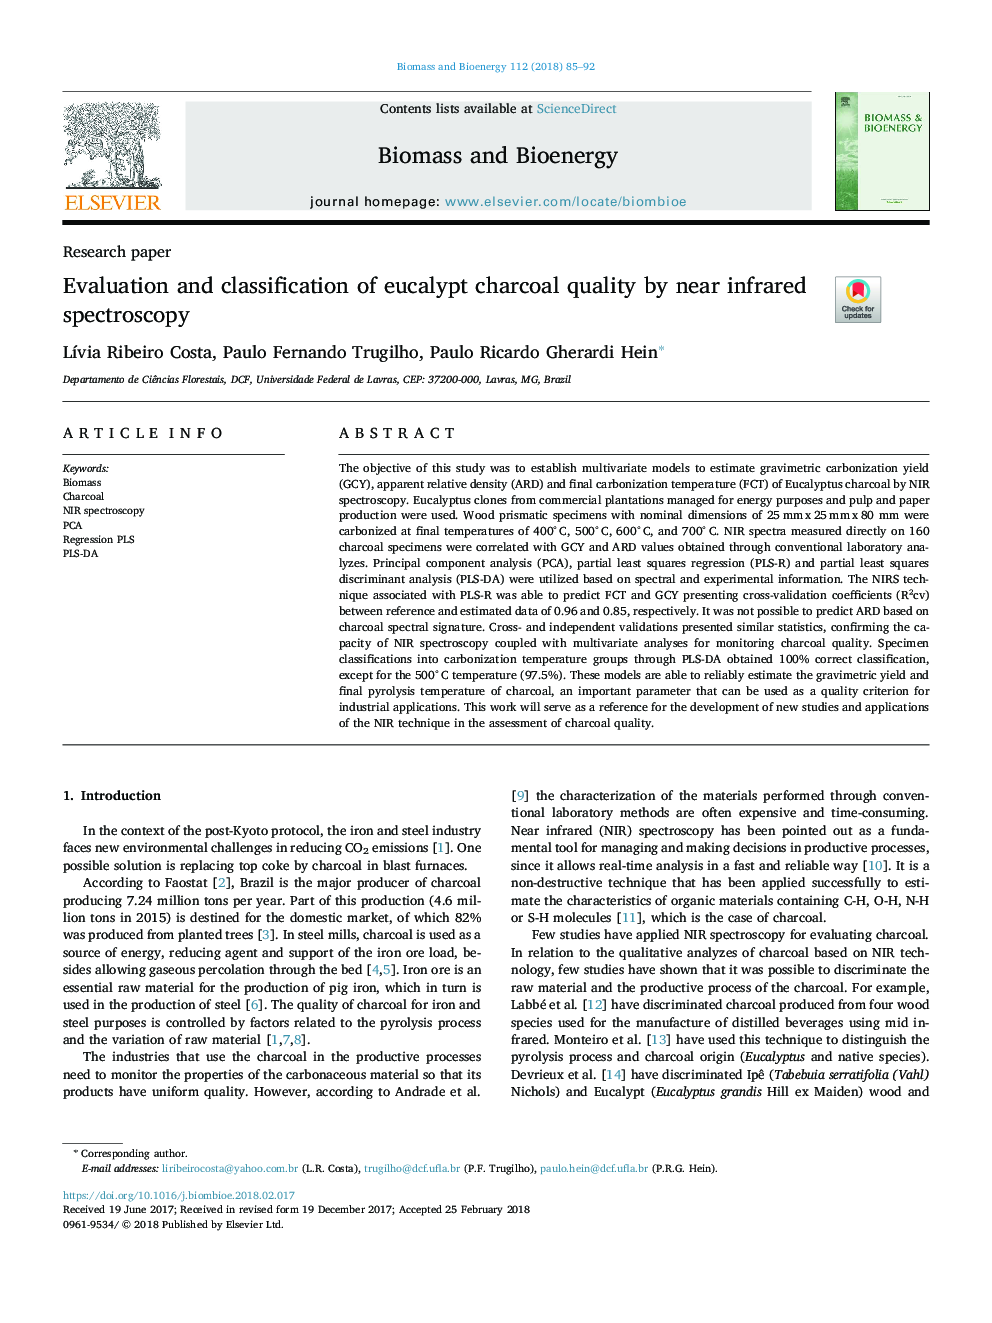 Evaluation and classification of eucalypt charcoal quality by near infrared spectroscopy